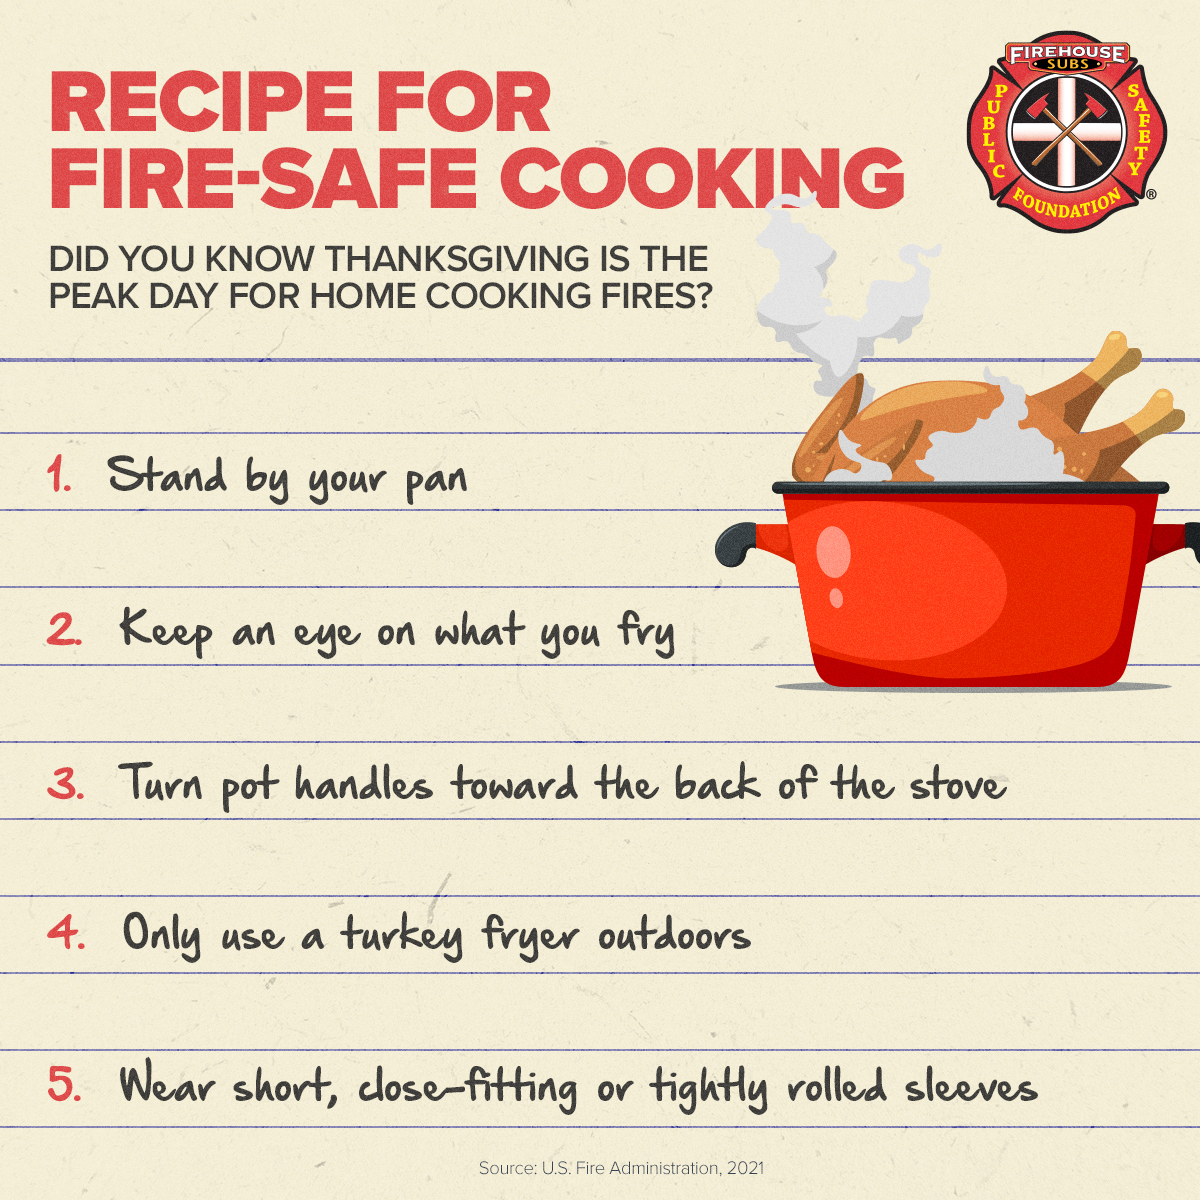 Cooking Safety Tips